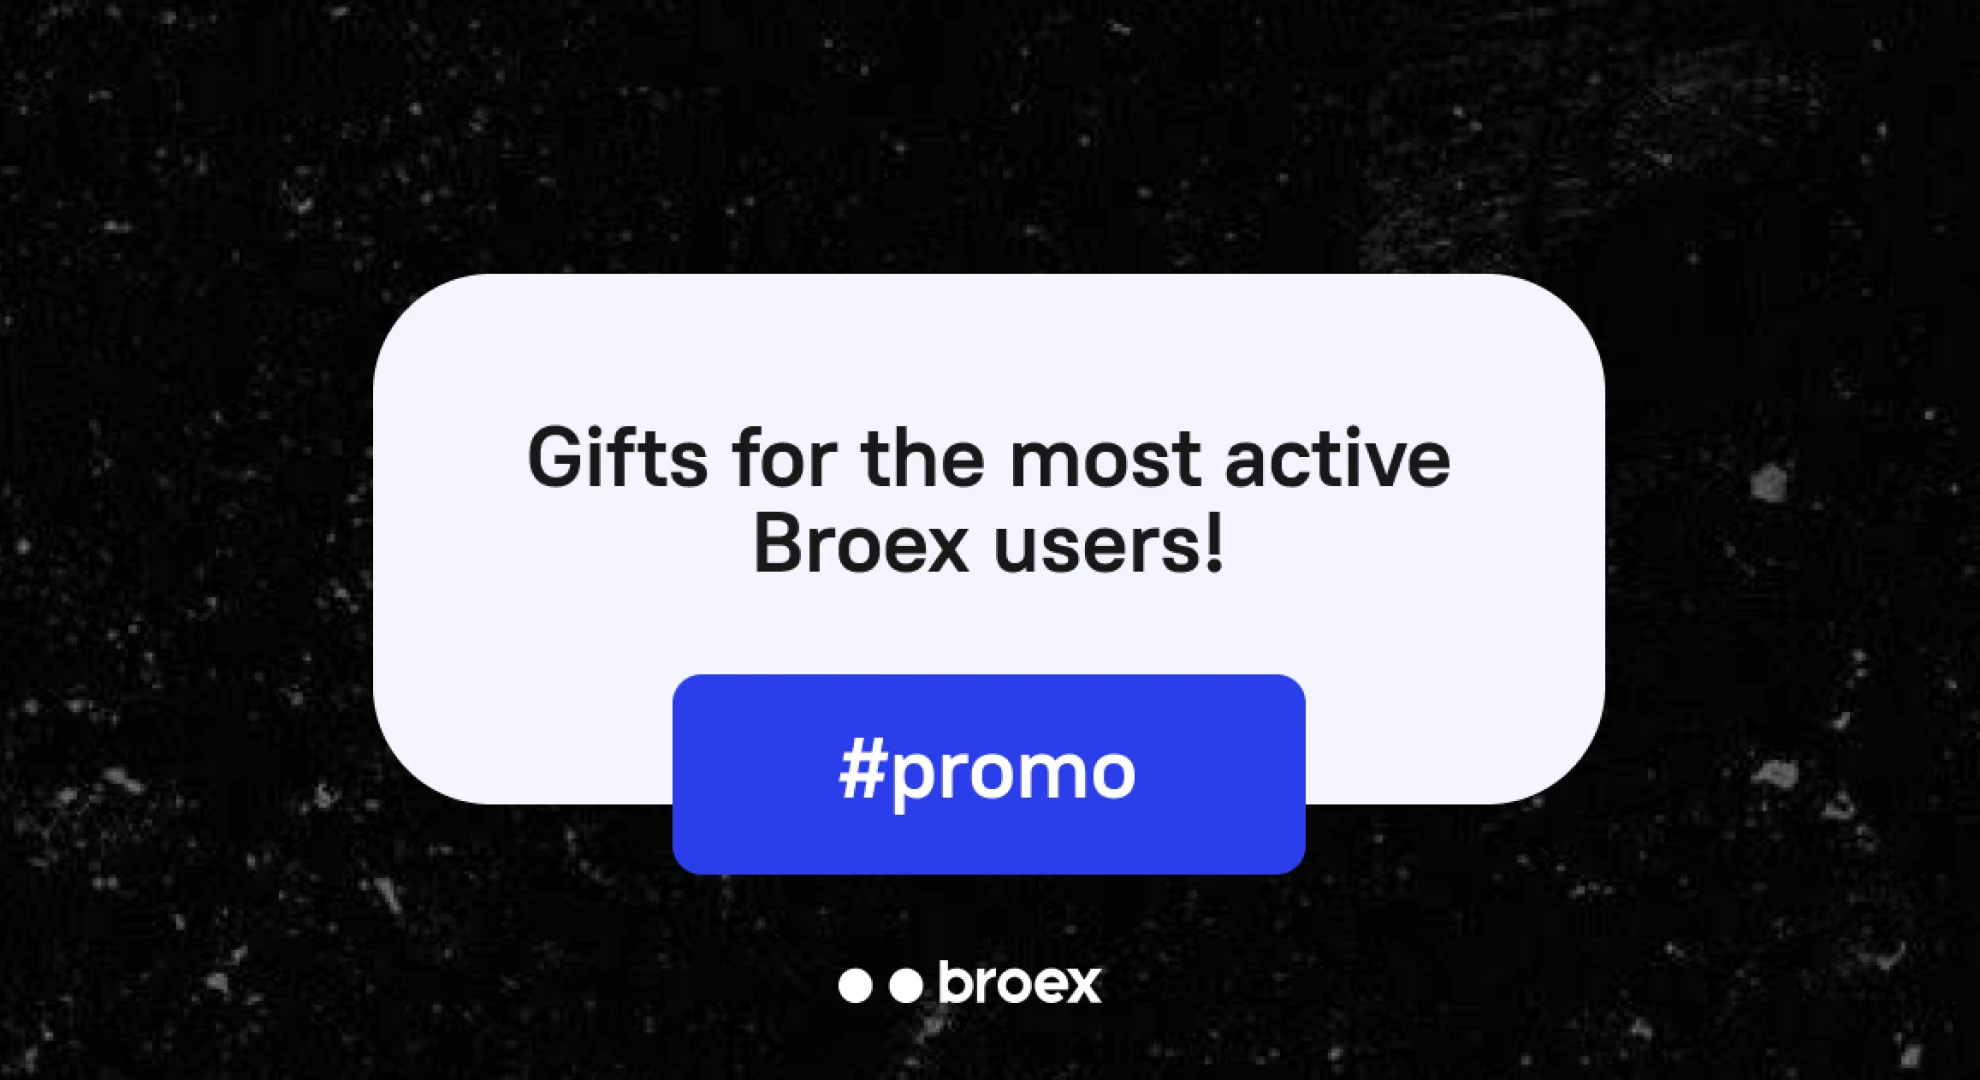 Gifts for the most active Broex users!